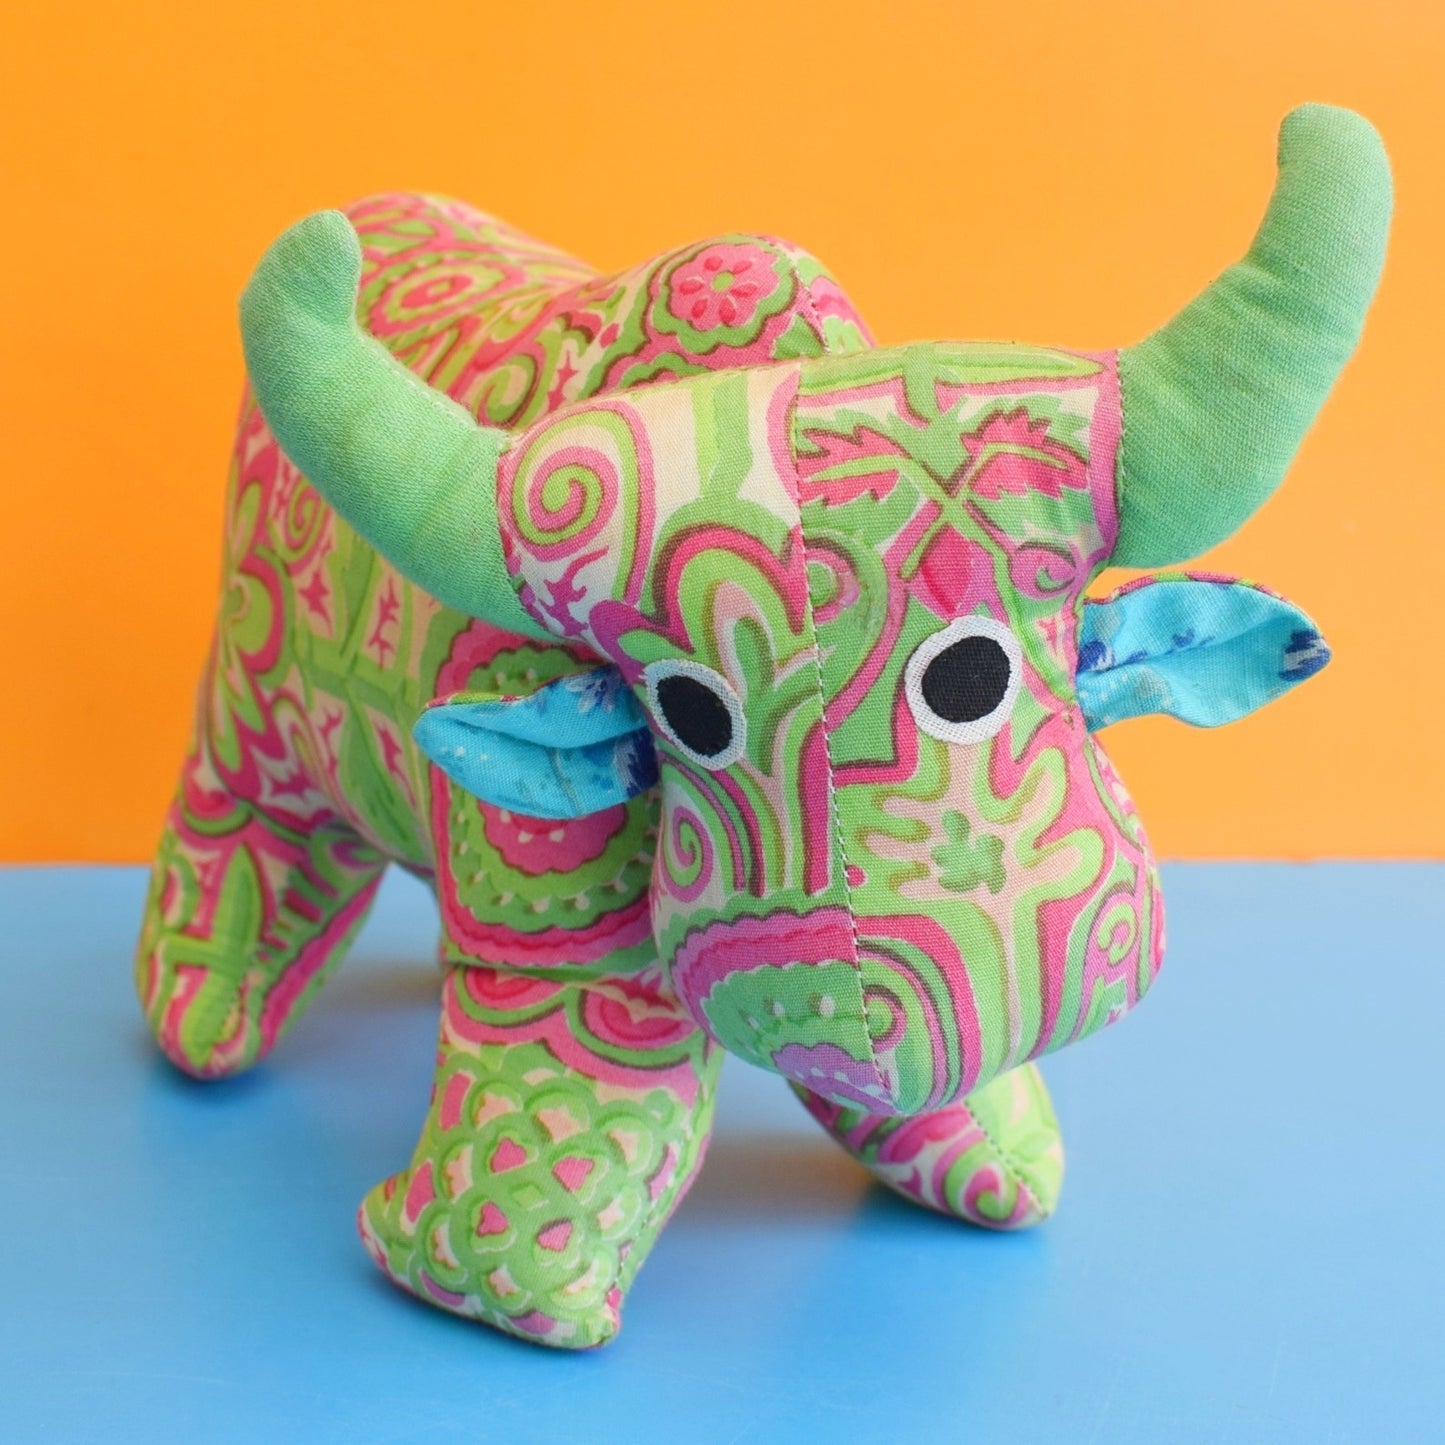 Vintage 1970s Cotton Toy Bull- Pink & Green